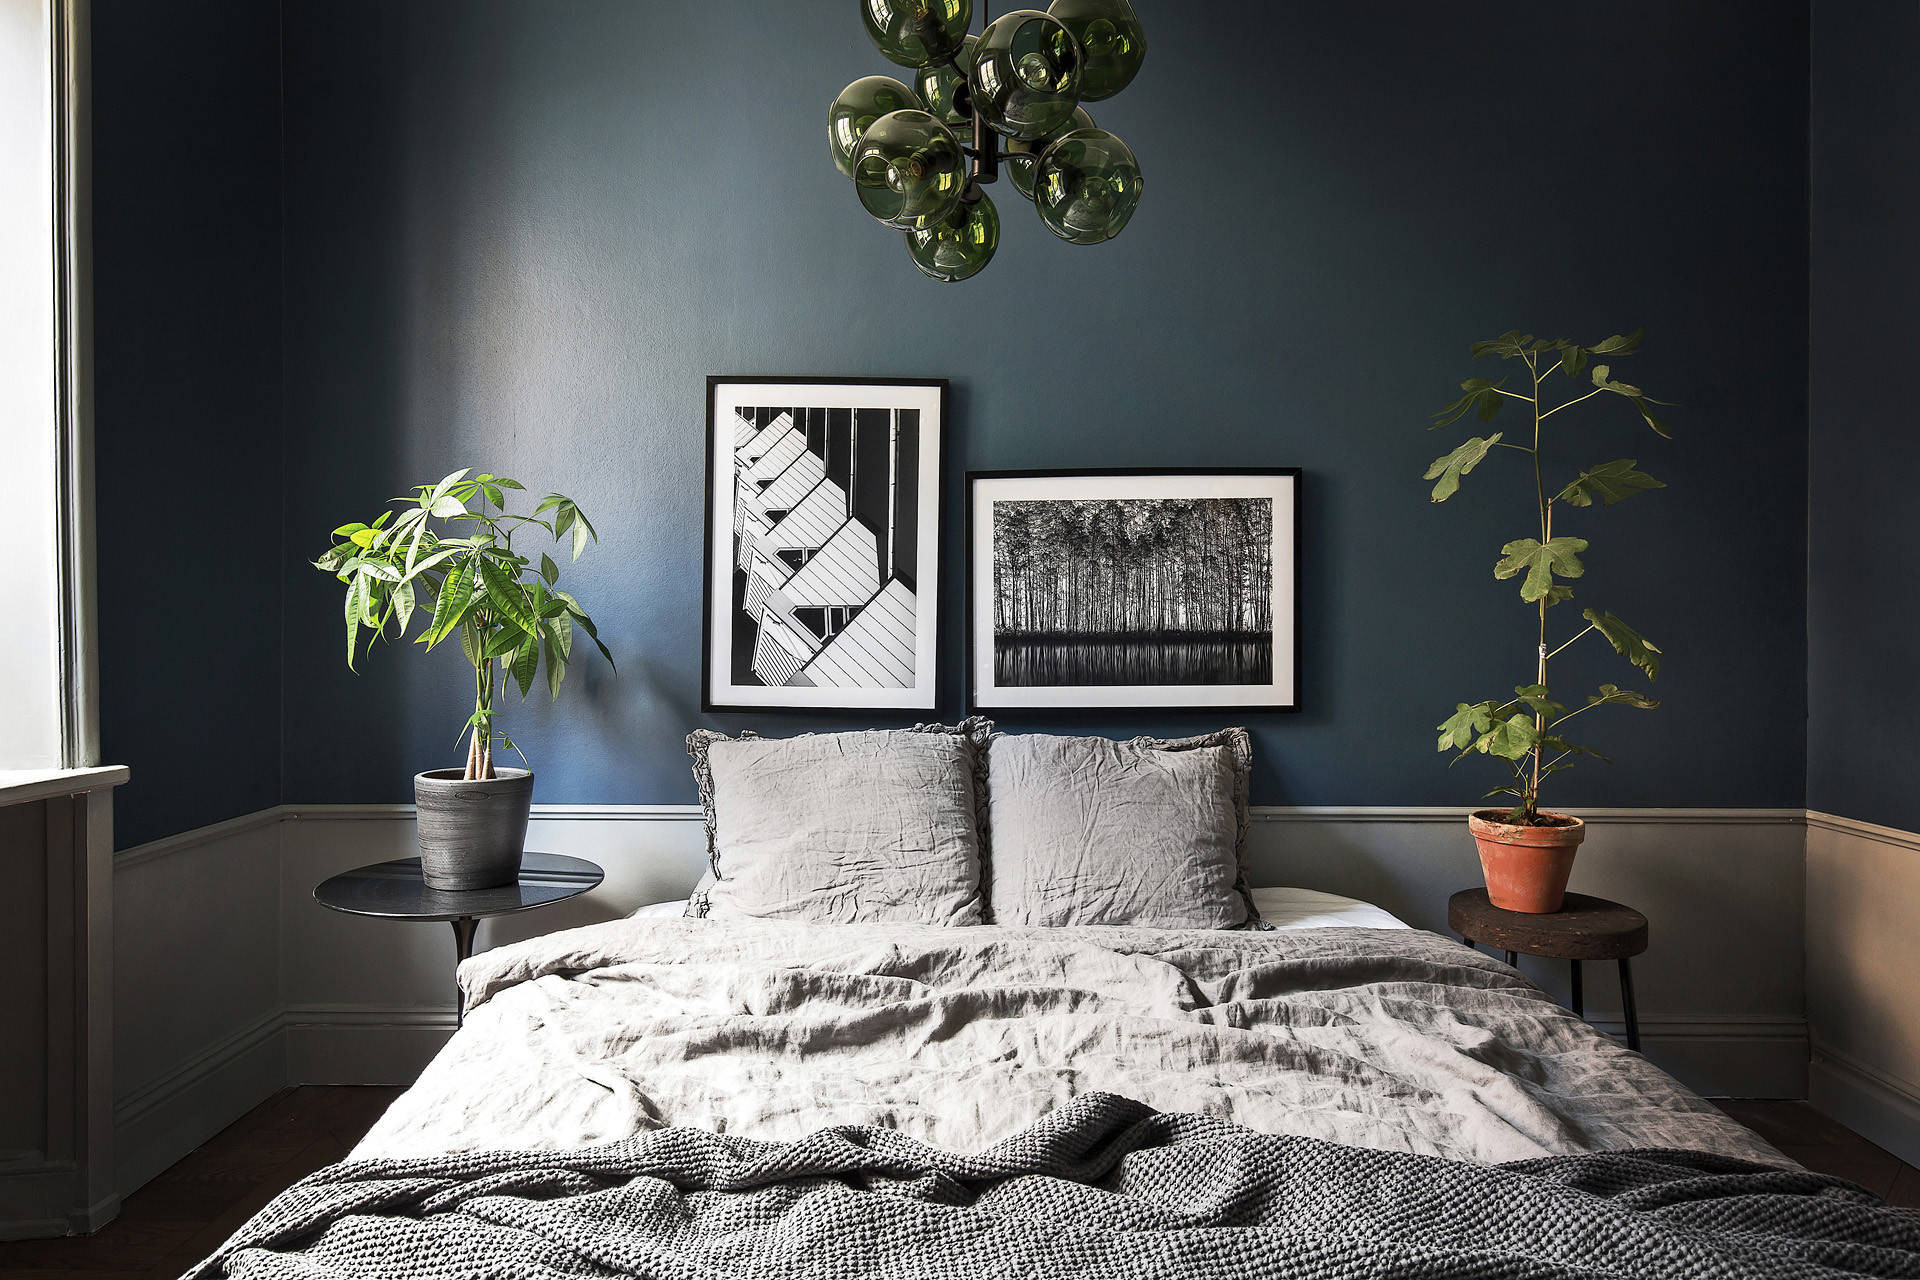 Small Bedroom Plants
 How to Decorate a Small Bedroom